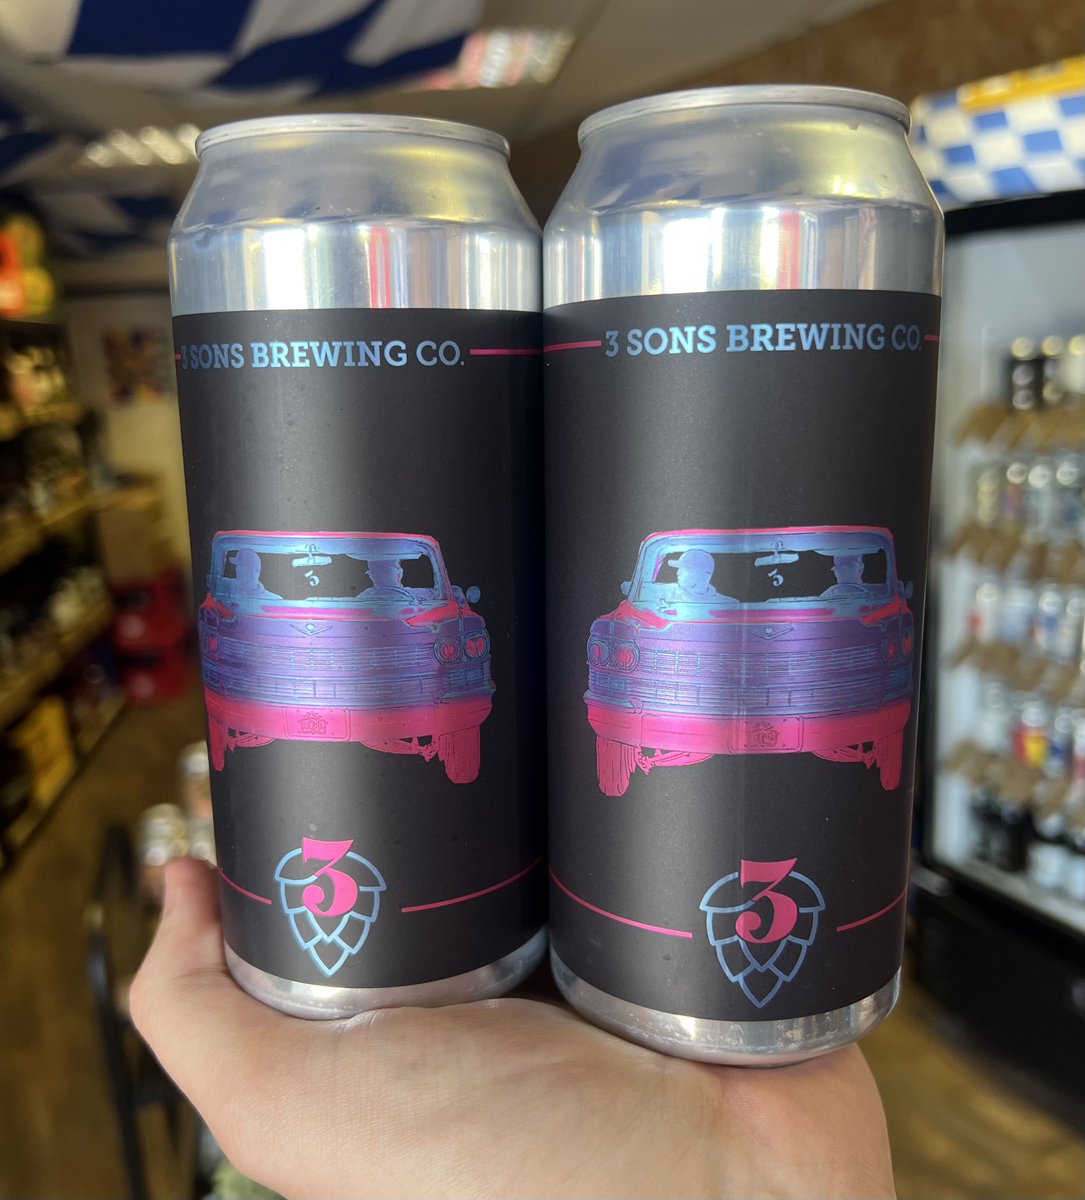 New In!🇺🇸🇺🇸 @3sonsbrewingco (Florida🇺🇸) 🍺 Double Dope - DIPA 9% Canned in August and air freighted for freshness. Double Dope is your quintessential US DIPA haze bomb hopped with Citra & Mosaic. In the fridge now. Open 'till 6pm! Prost!